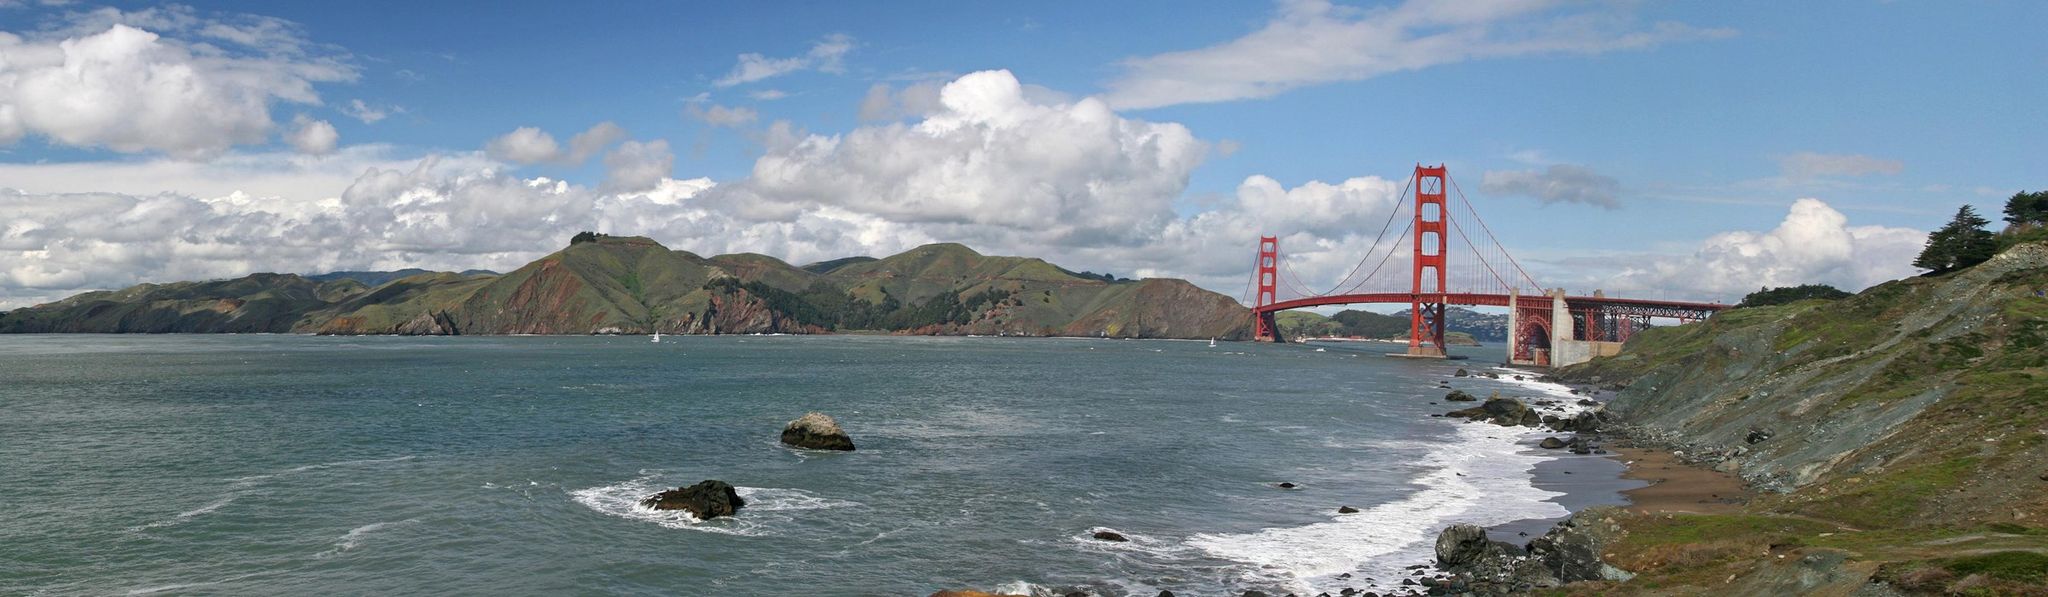 Golden Gate Bridge from the Presidio with Marin Headlands in background.